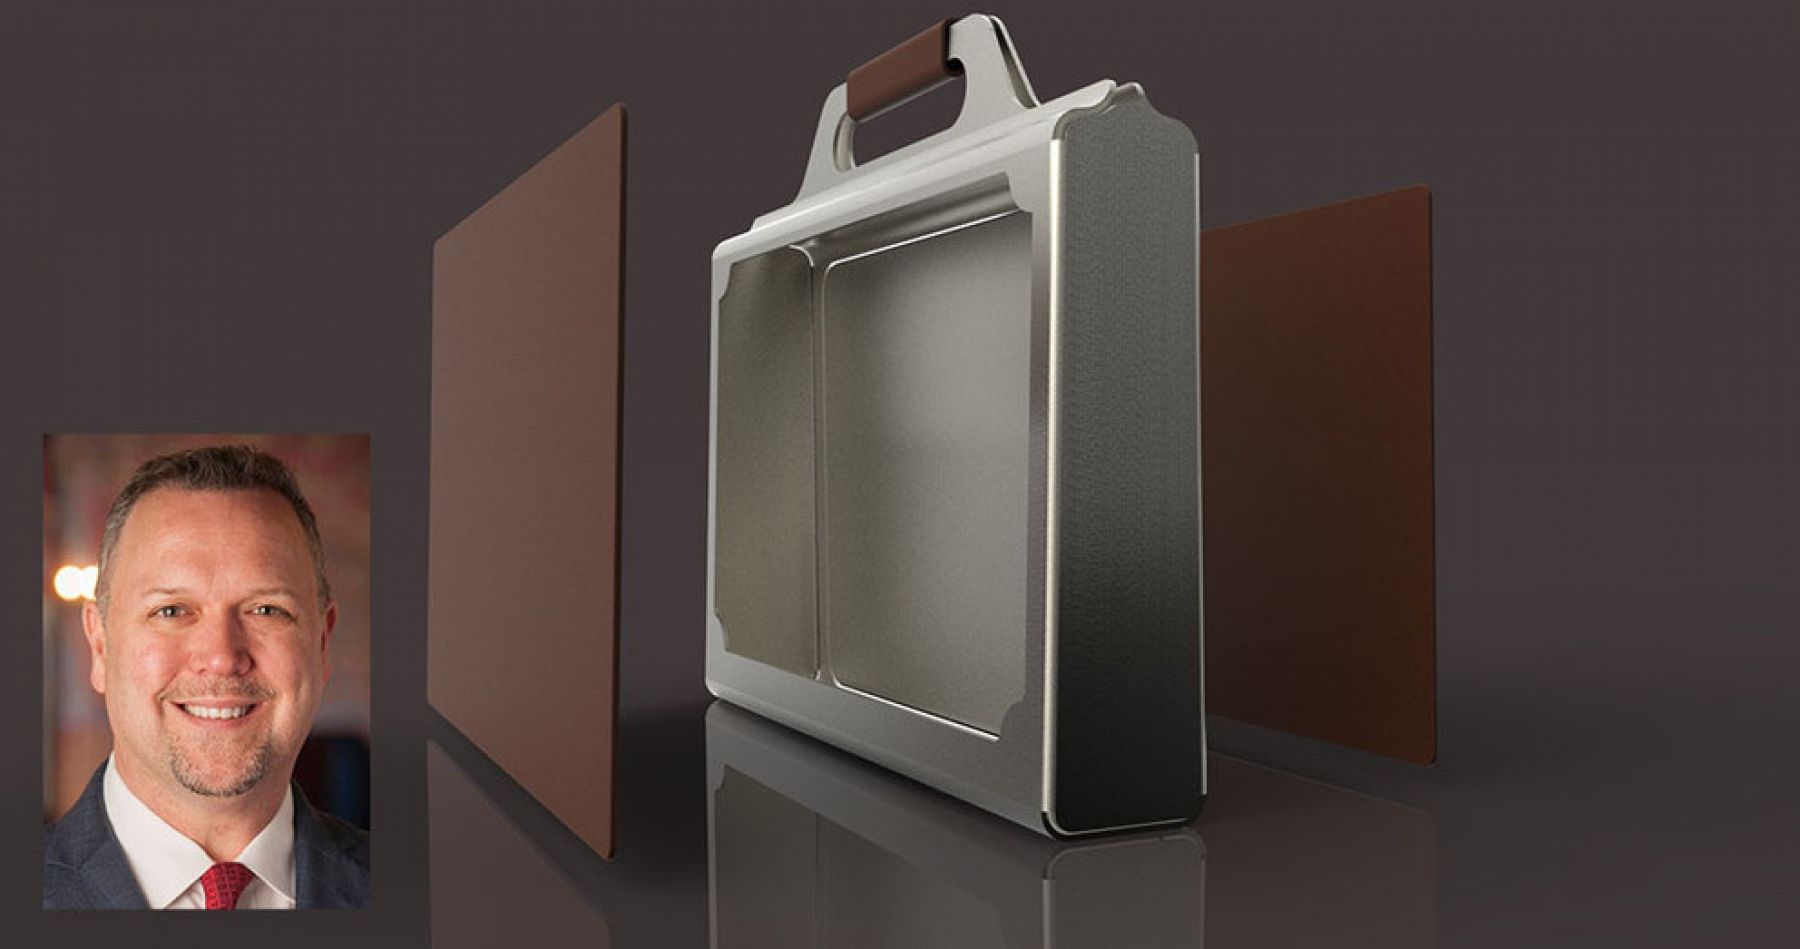 A profile of Eric Polins and a rendering of his briefcase design